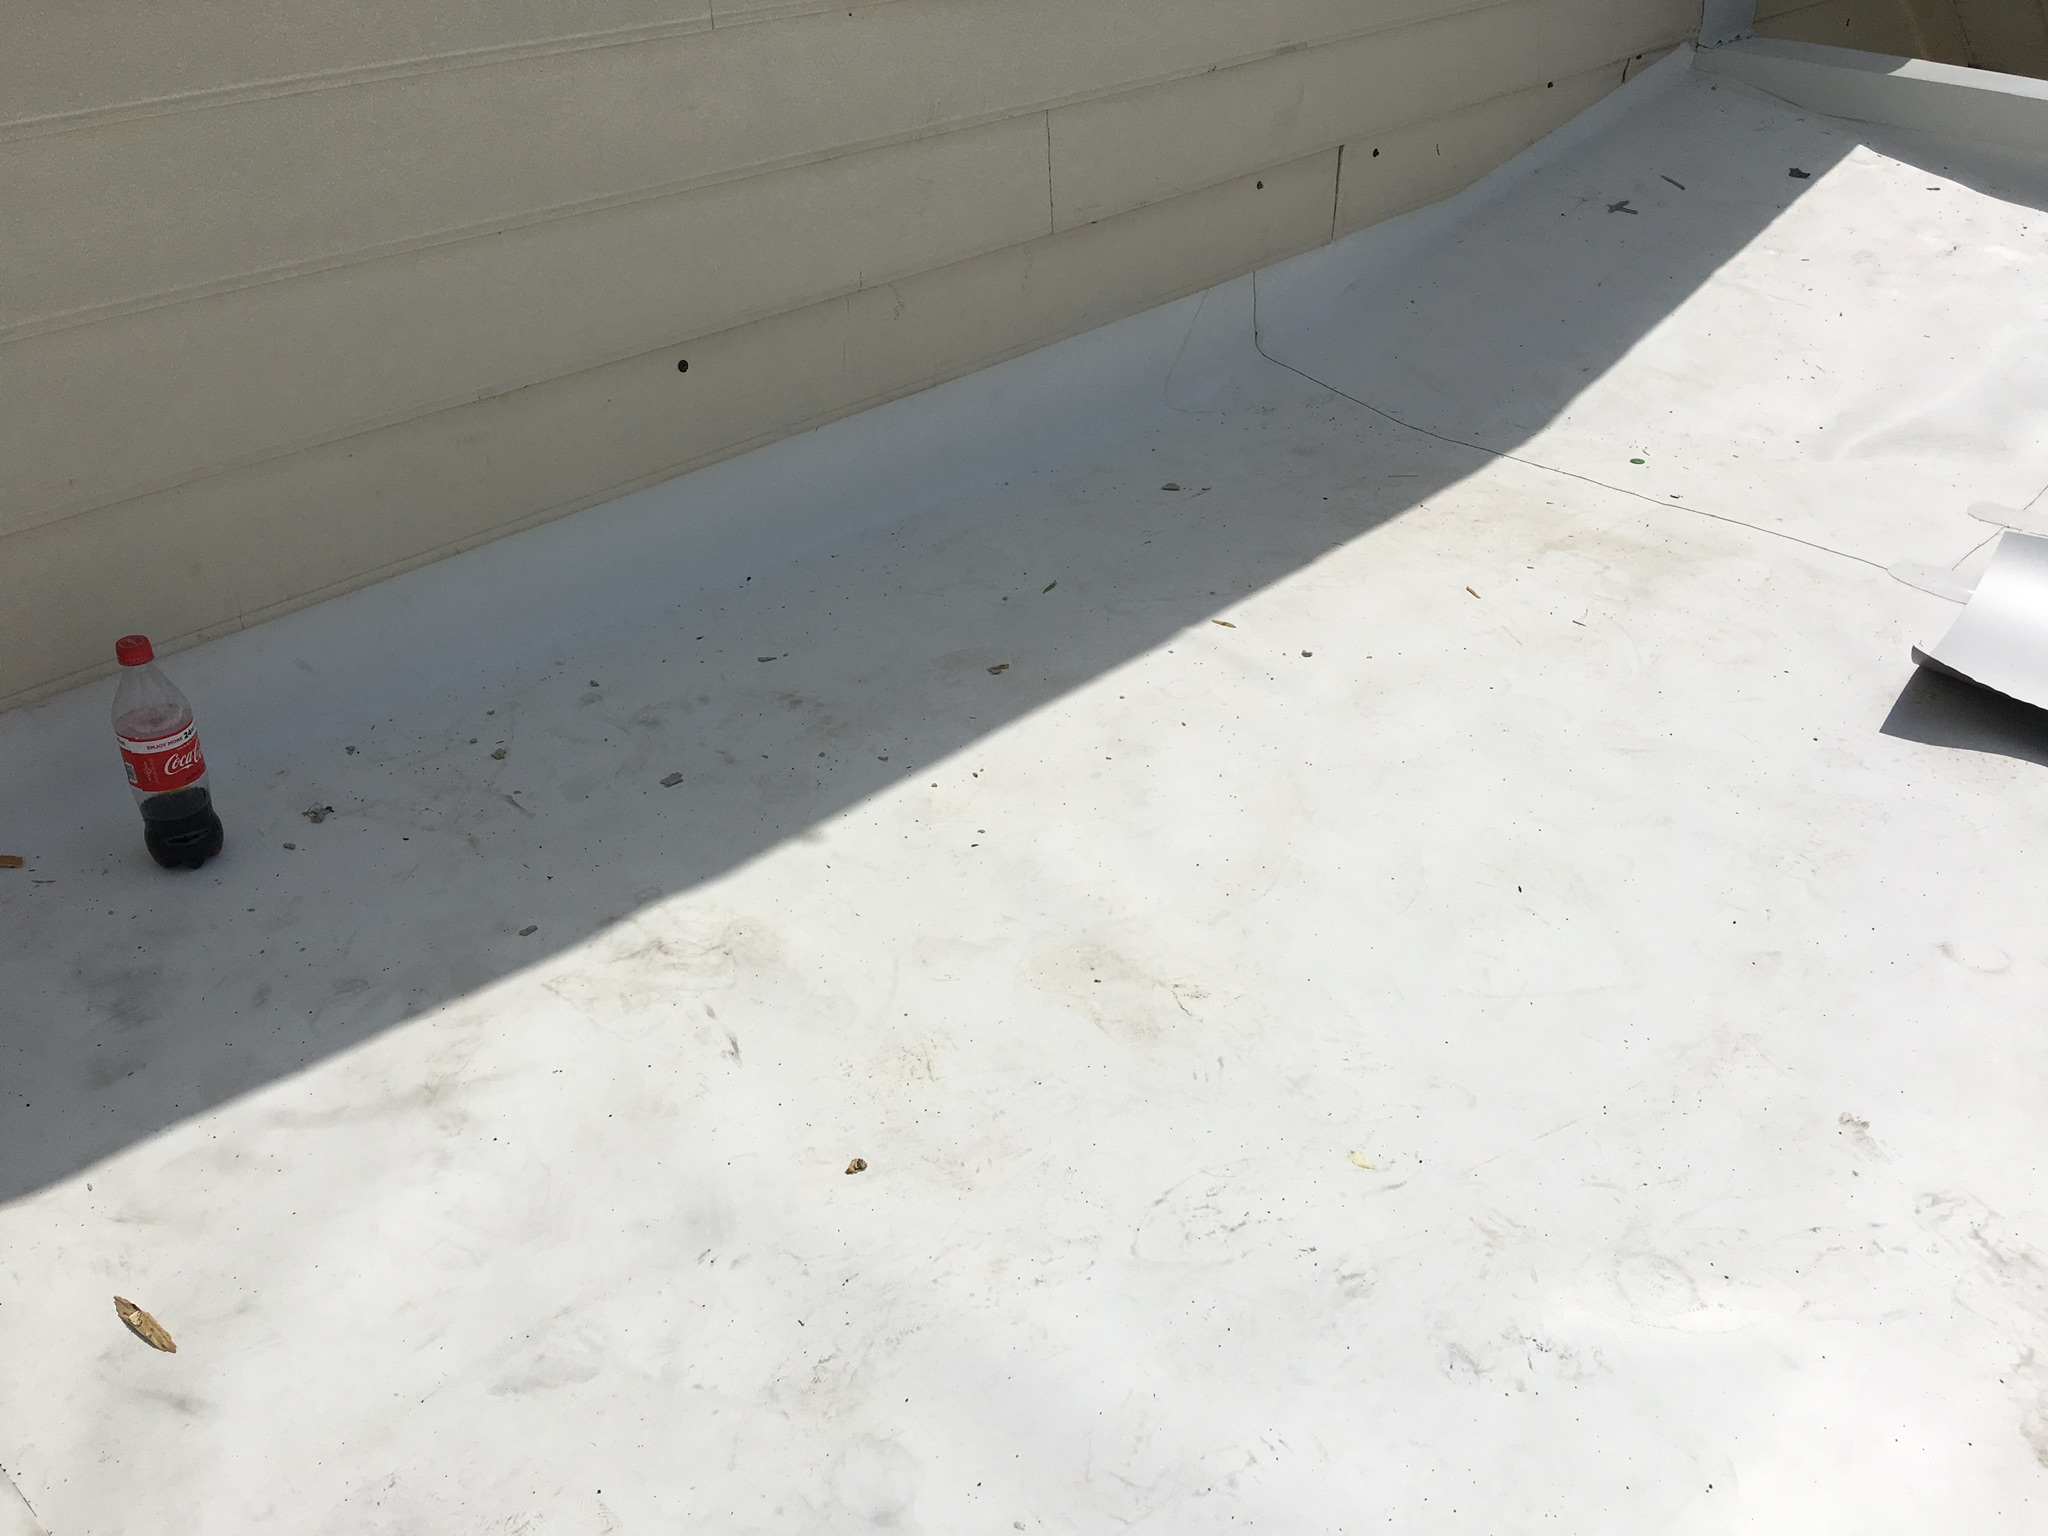 This is a view of the white TPO membrane roof that meets the wall of the shingle roof.